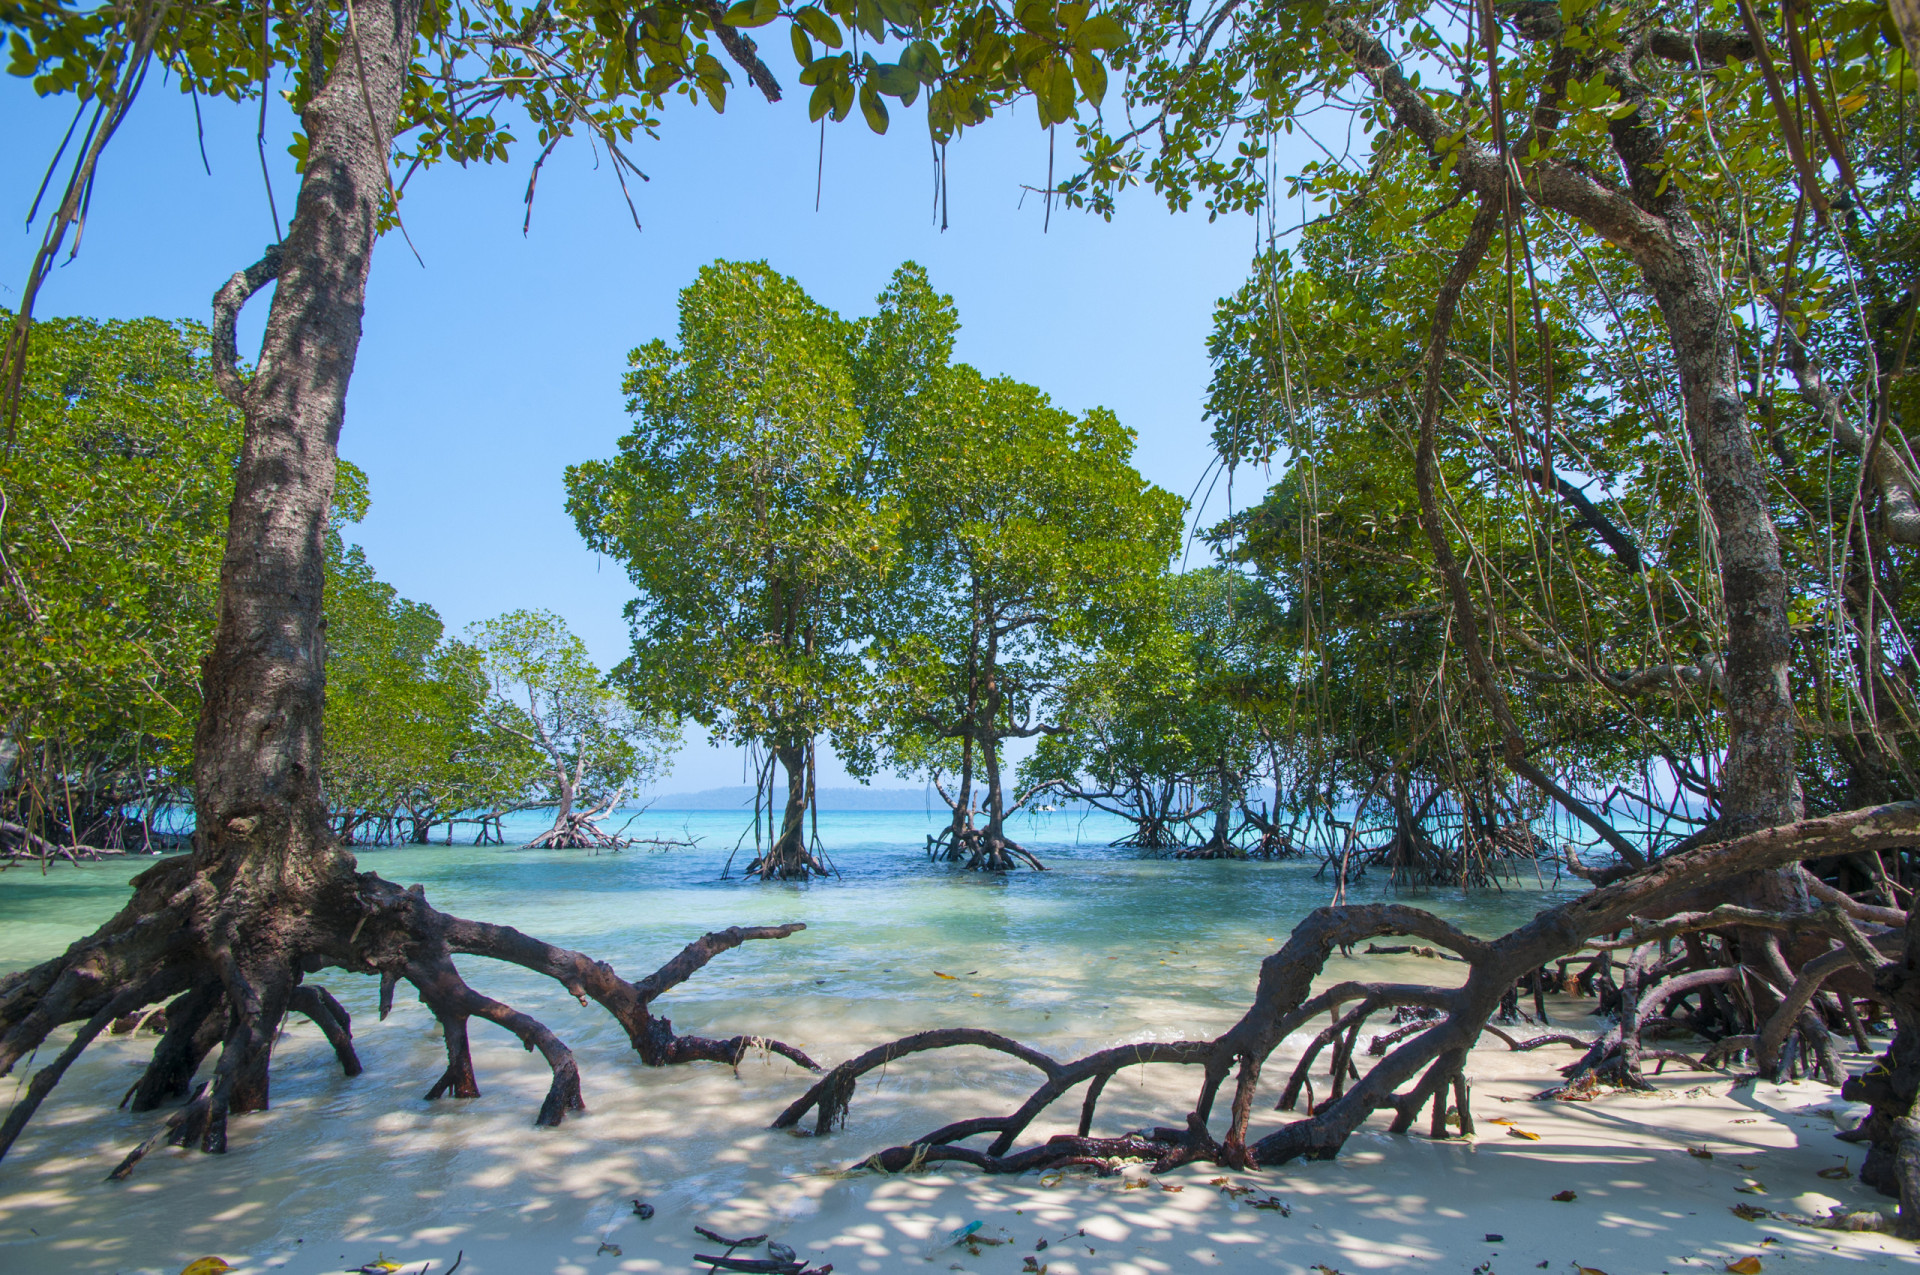 <p>The Andaman island of Swaraj Dweep, previously known as Havelock Island, is an eco-tourism hotspot. It has some of the best beaches in the region, notably Radhanagar Beach, Elephant Beach, and Kalapathar Beach.</p><p><a href="https://www.msn.com/en-nz/community/channel/vid-7xx8mnucu55yw63we9va2gwr7uihbxwc68fxqp25x6tg4ftibpra?cvid=94631541bc0f4f89bfd59158d696ad7e">Follow us and access great exclusive content every day</a></p>